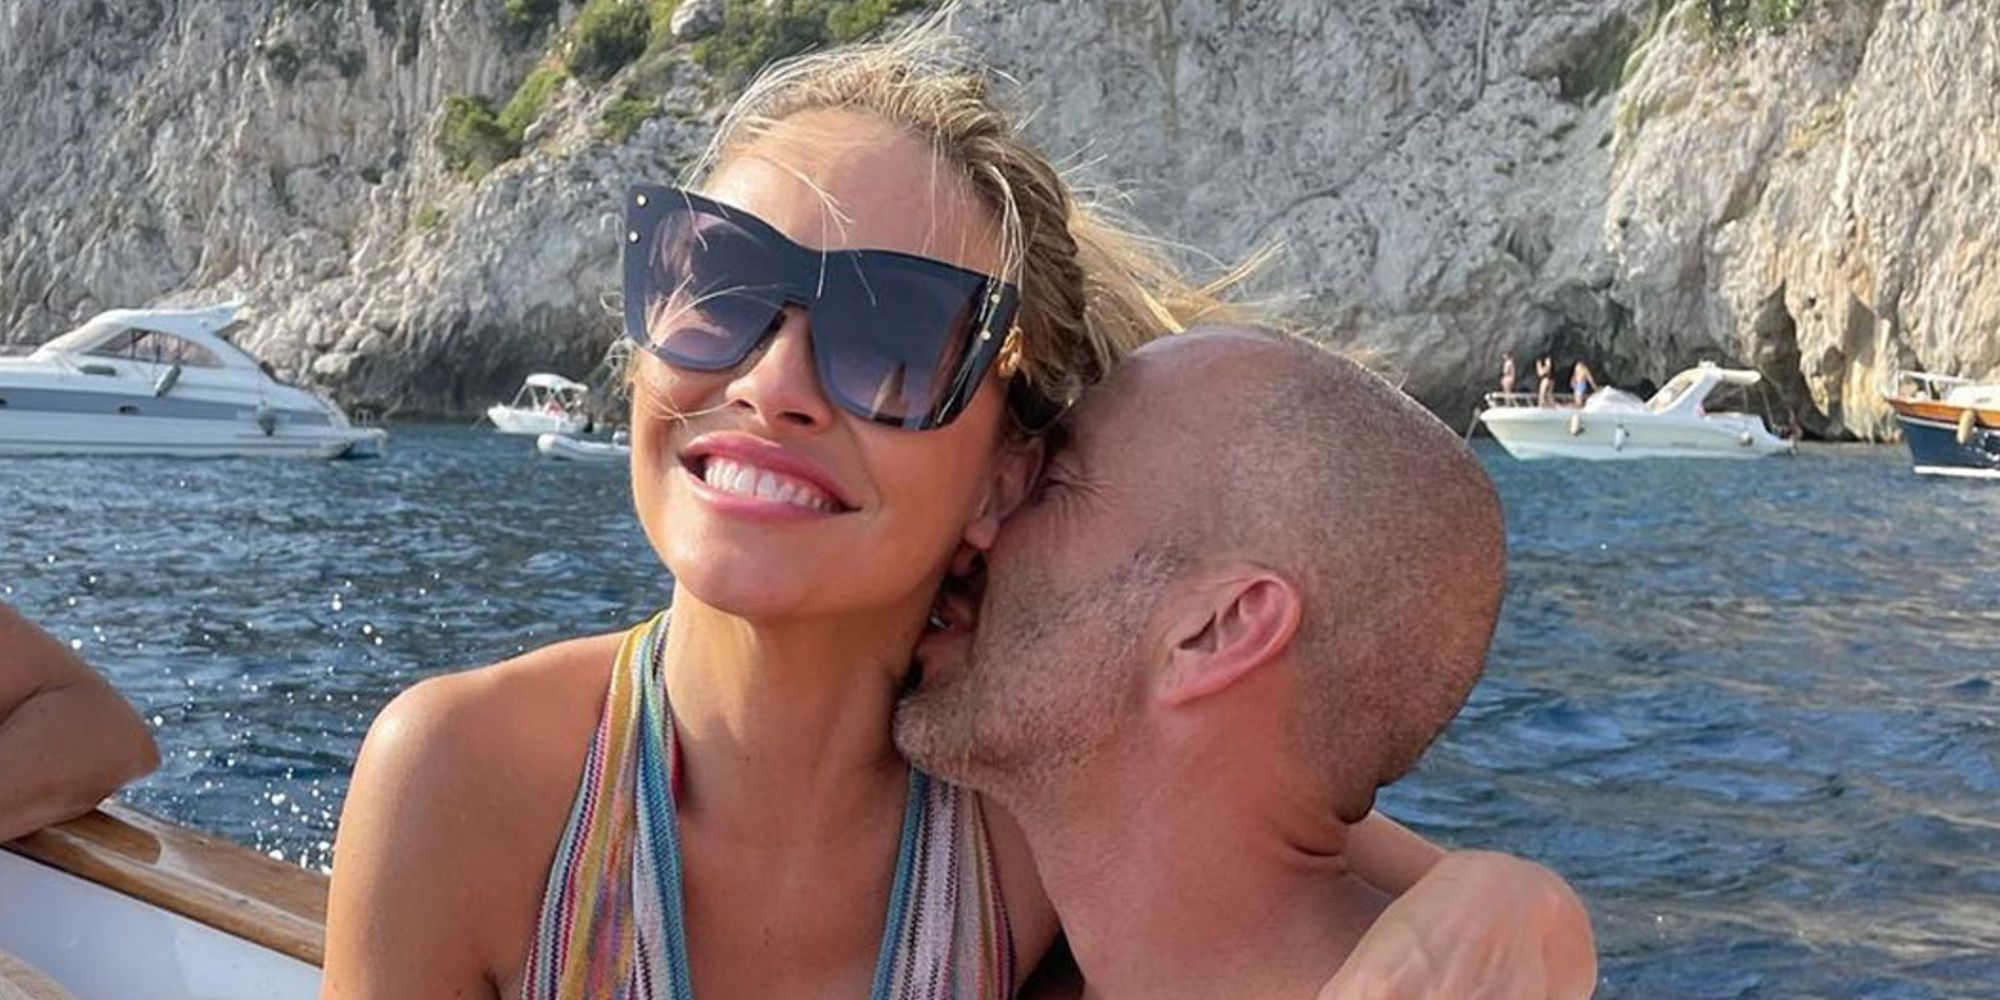 Chrishell Stause and Jason Oppenheim from Selling Sunset share photo together via Instagram